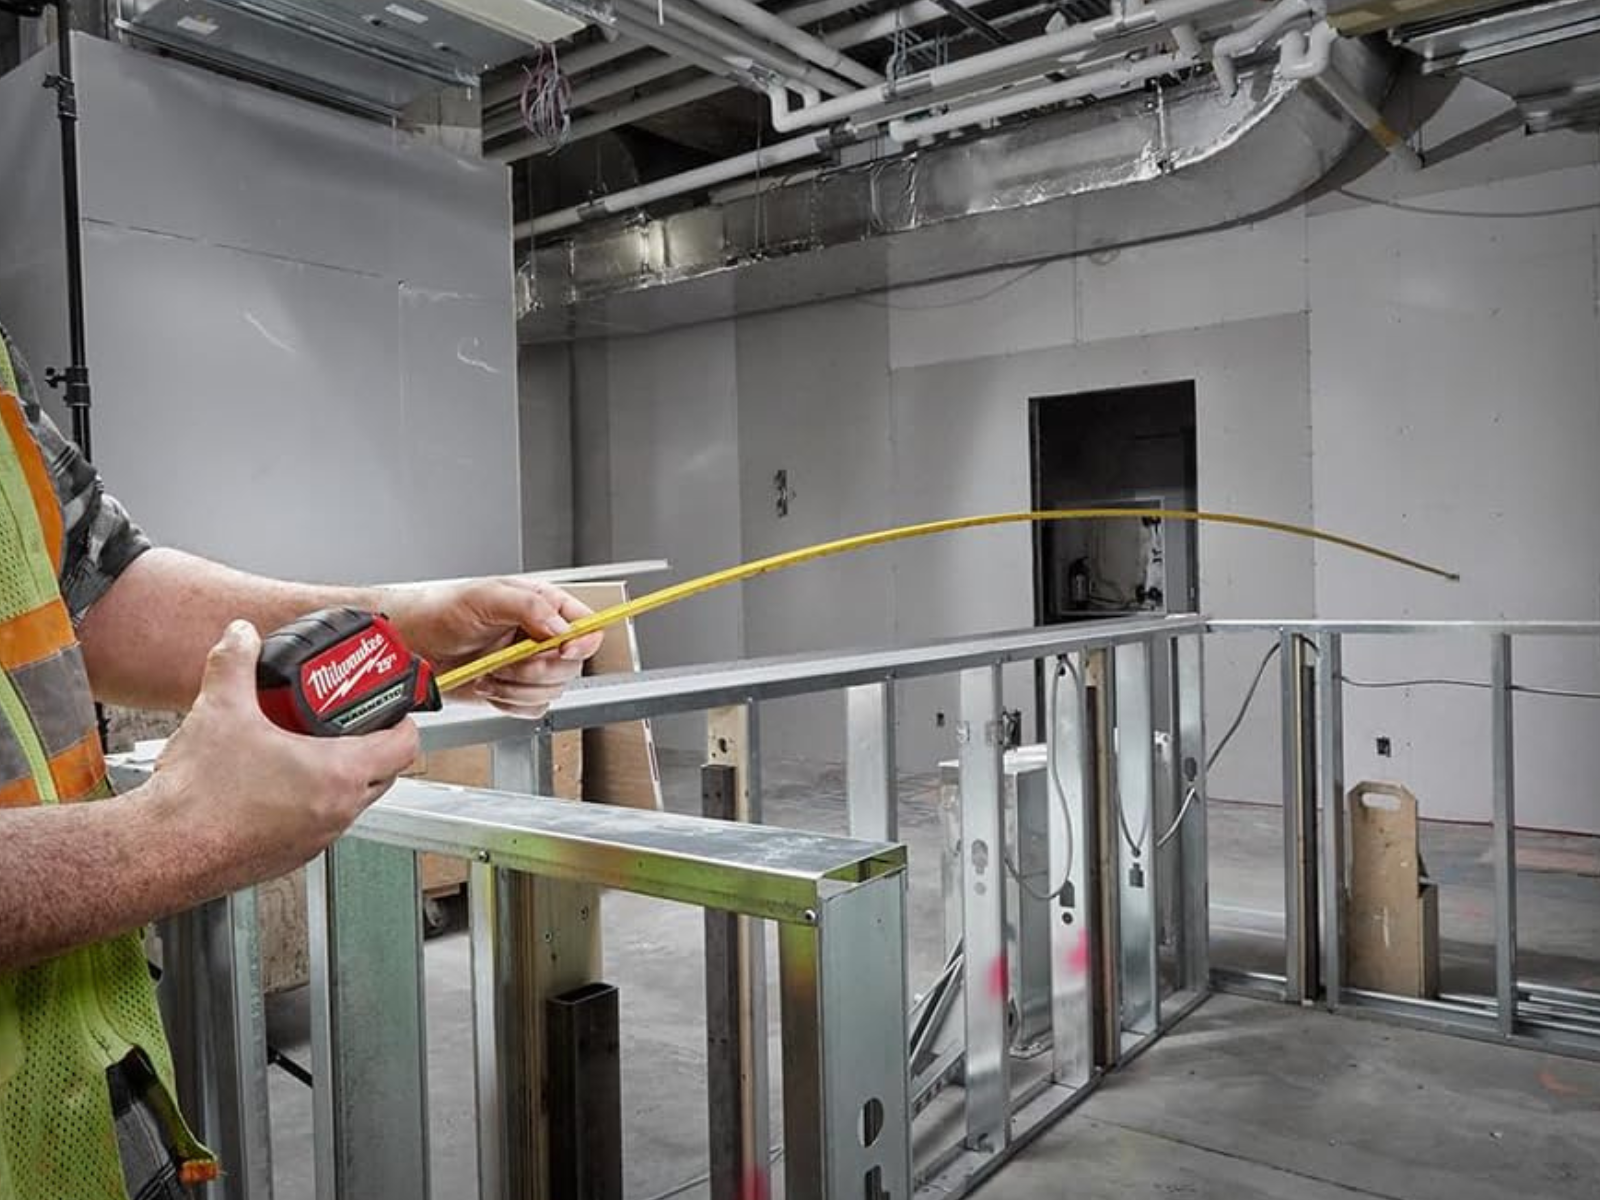 A man with a Milwaukee measuring tape extended 5 meters while building a steel frame wall inside a large building